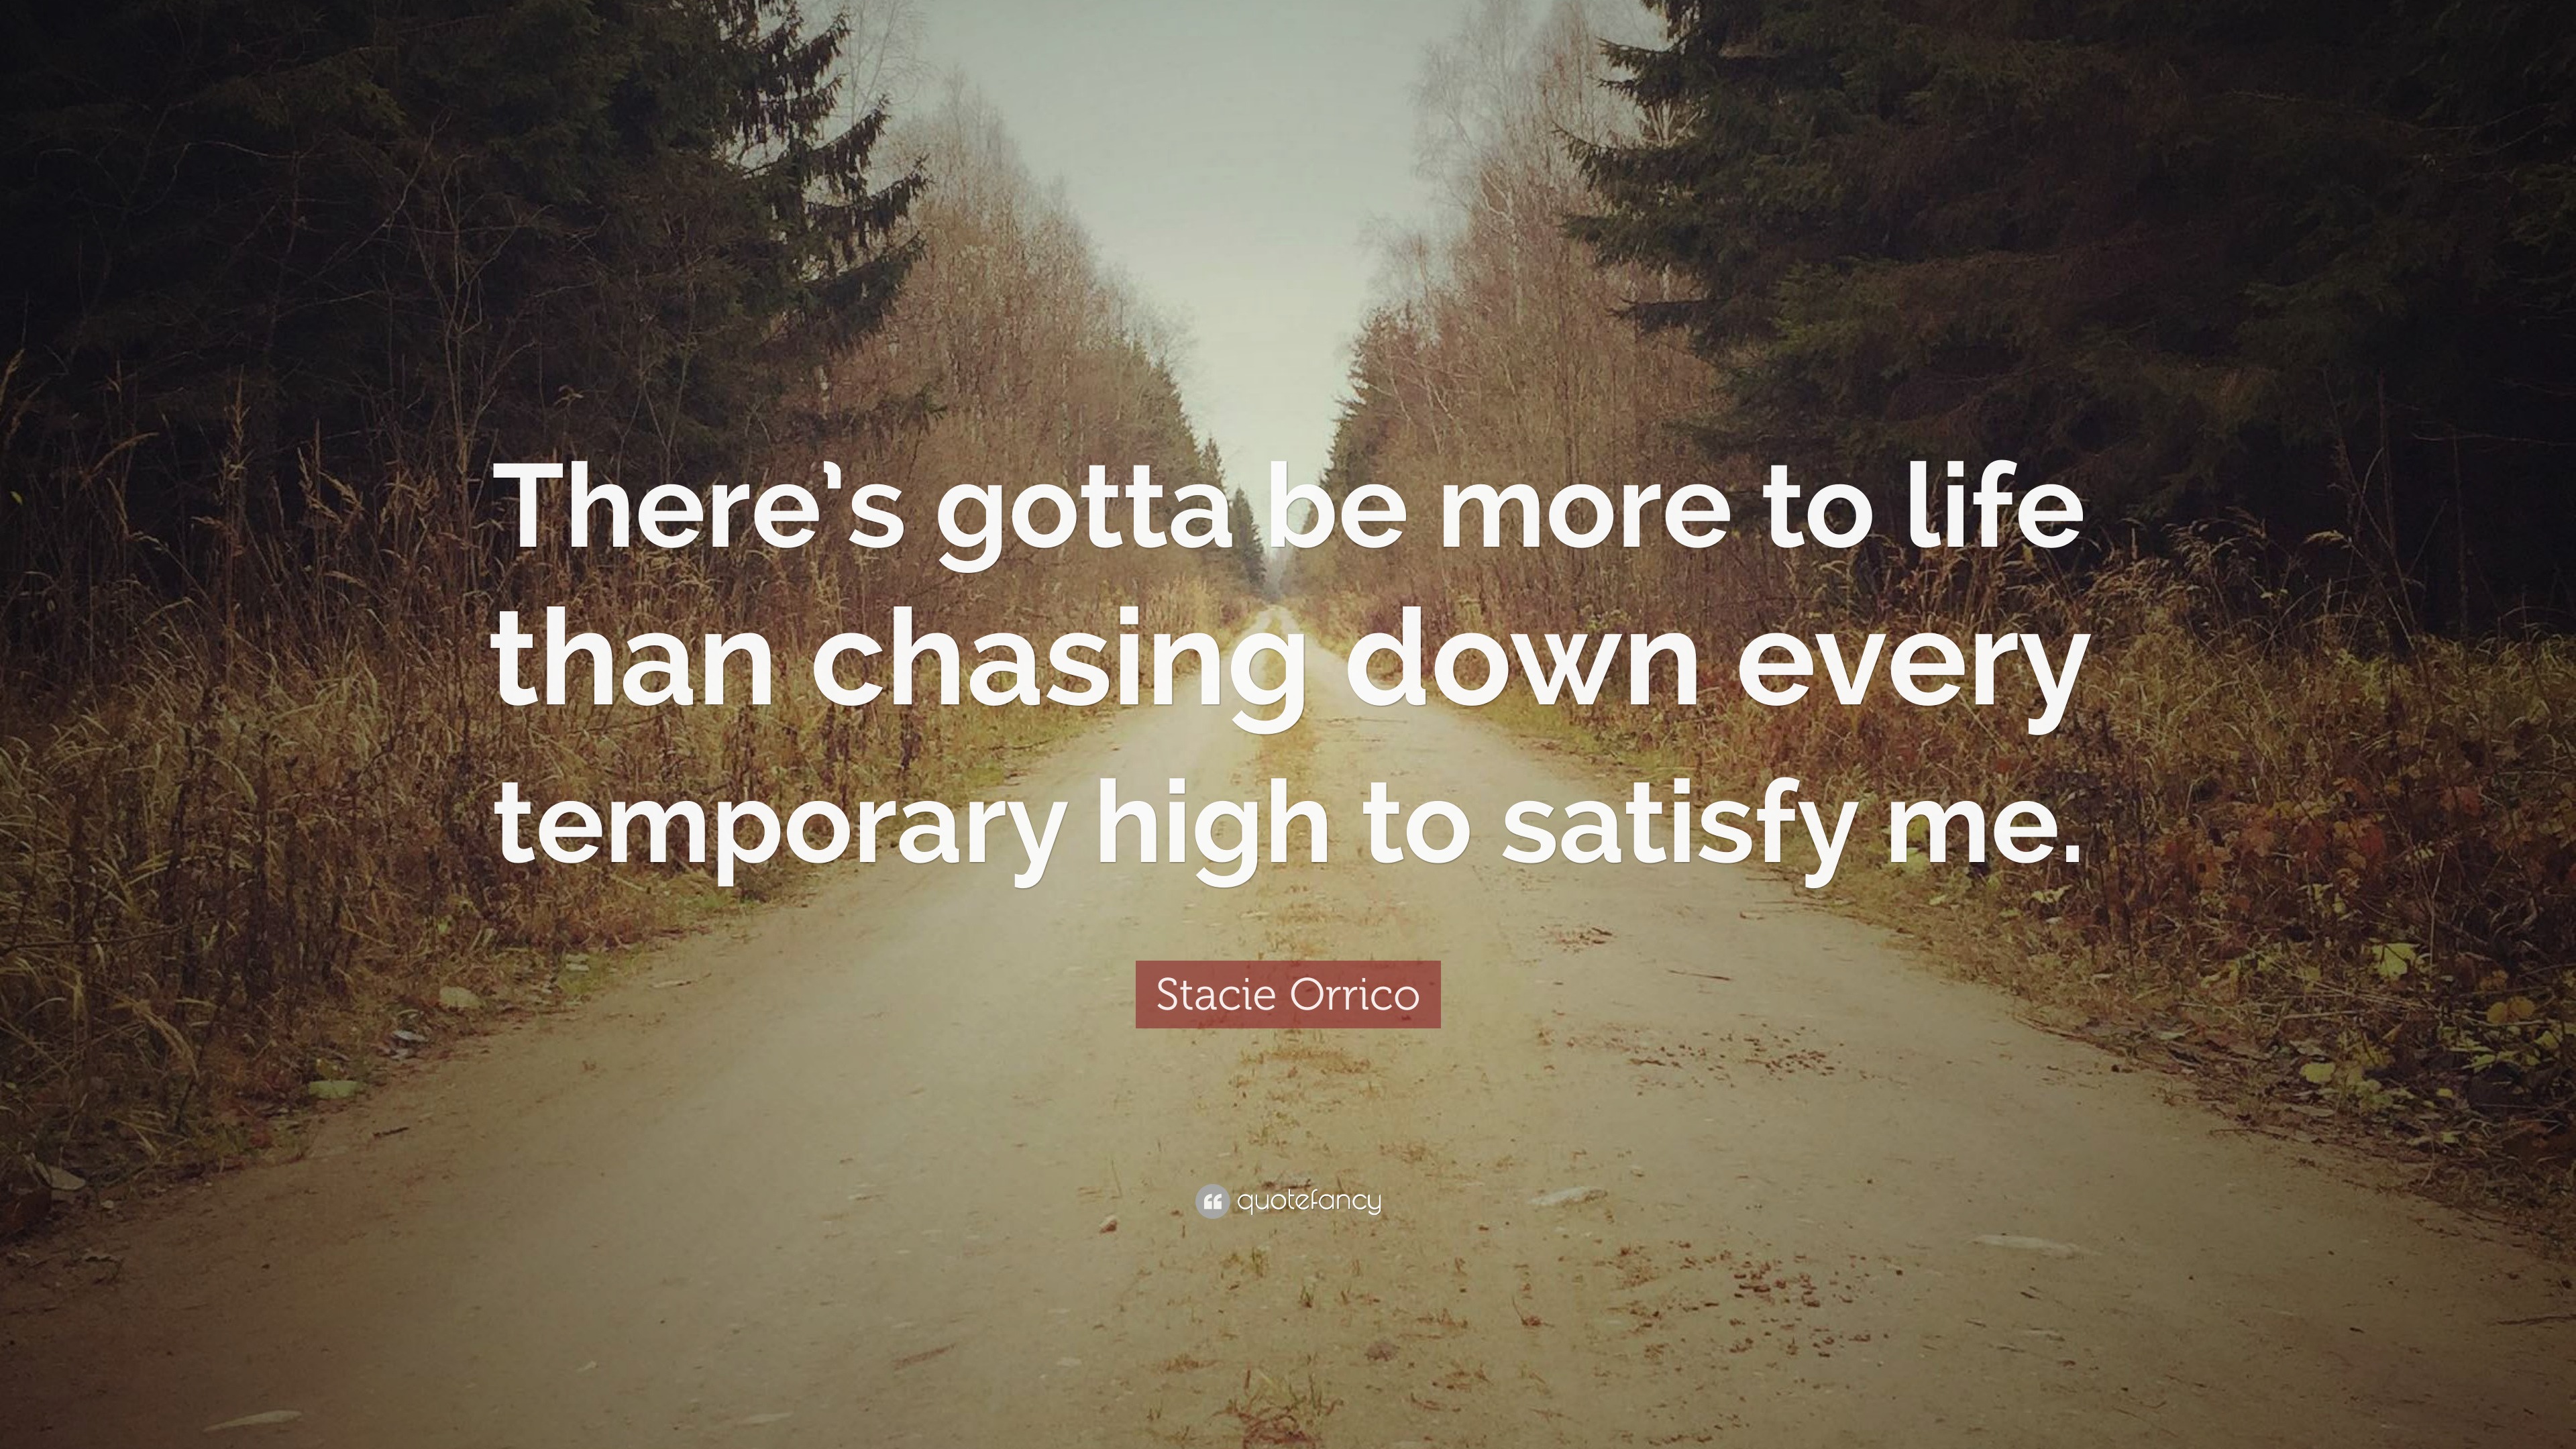 Stacie Orrico Quote: “There's gotta be more to life than chasing down every  temporary high to